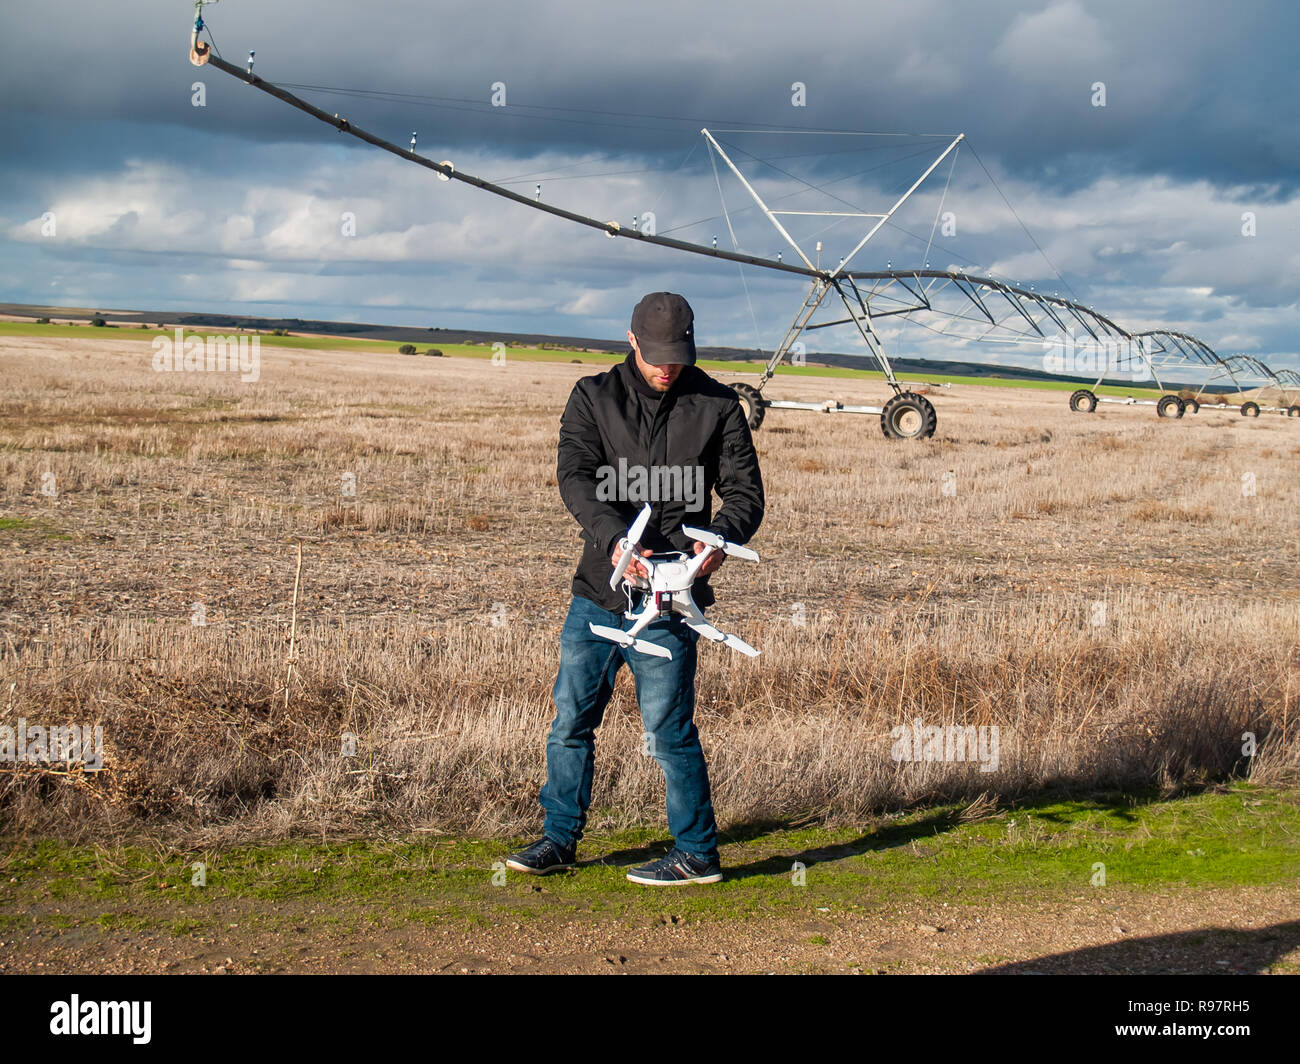 A drone pilot configuring his drone in a field with and irrigation system before flying Stock Photo